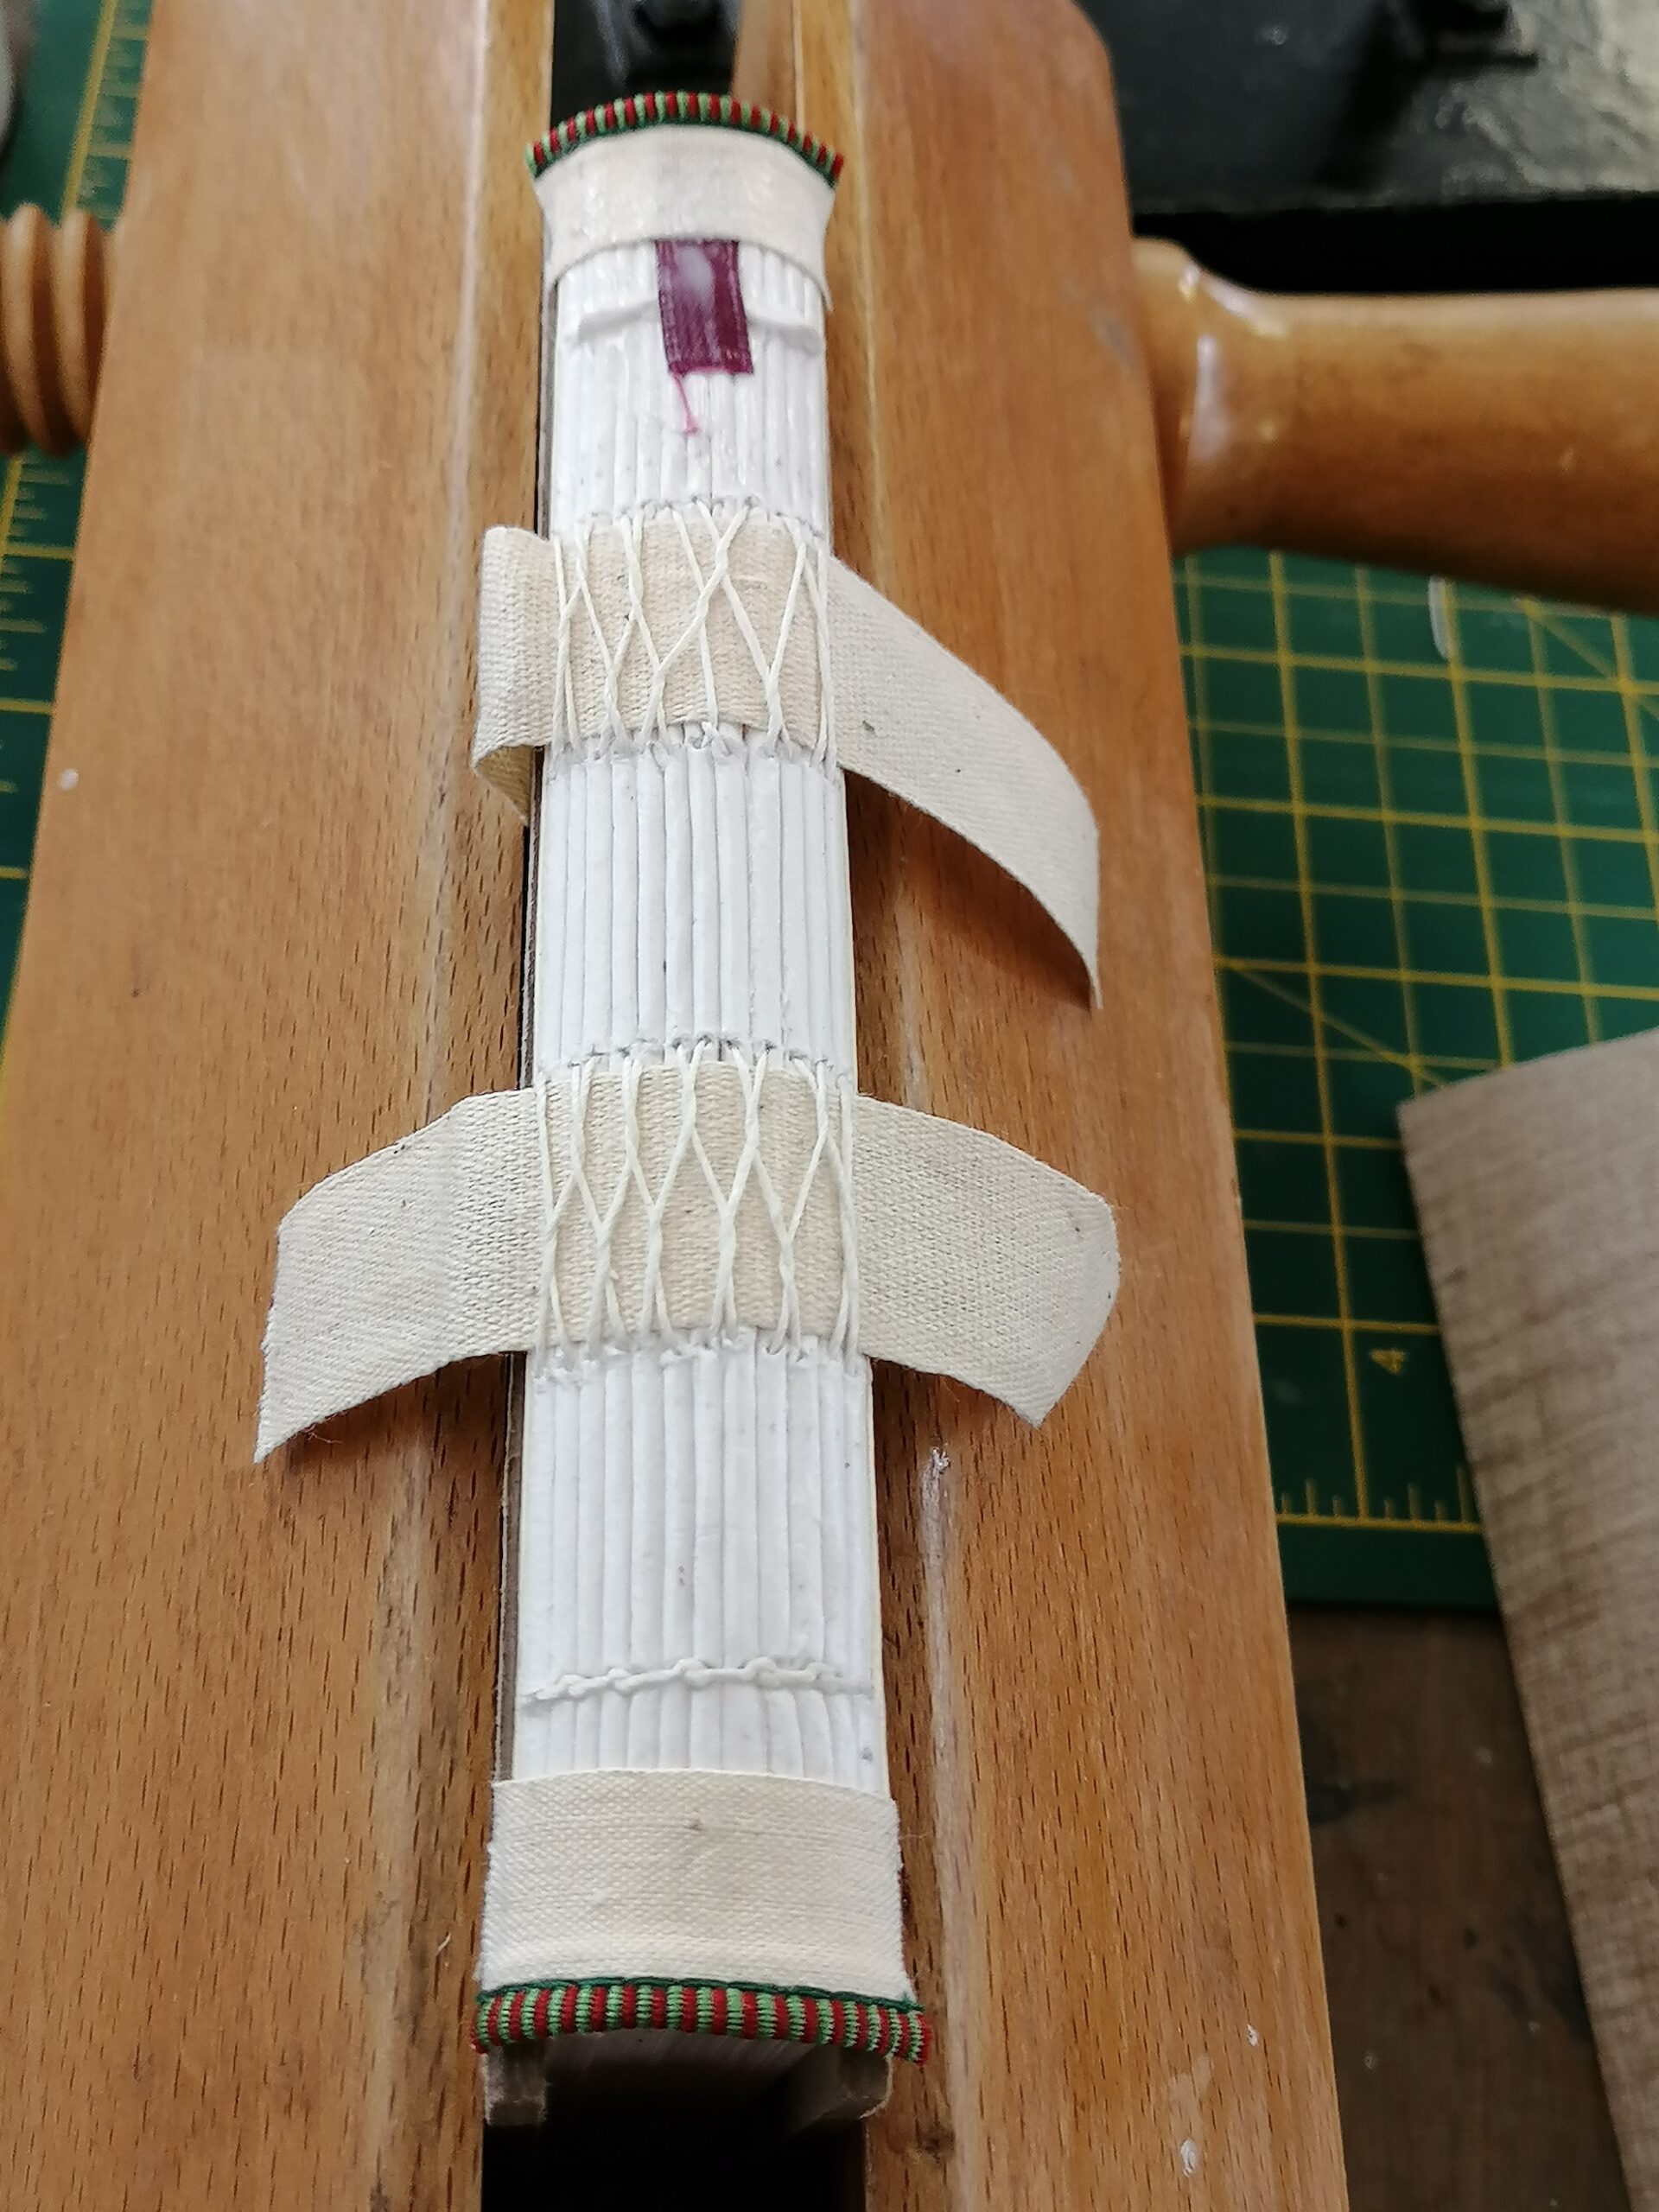 Spine with head bands